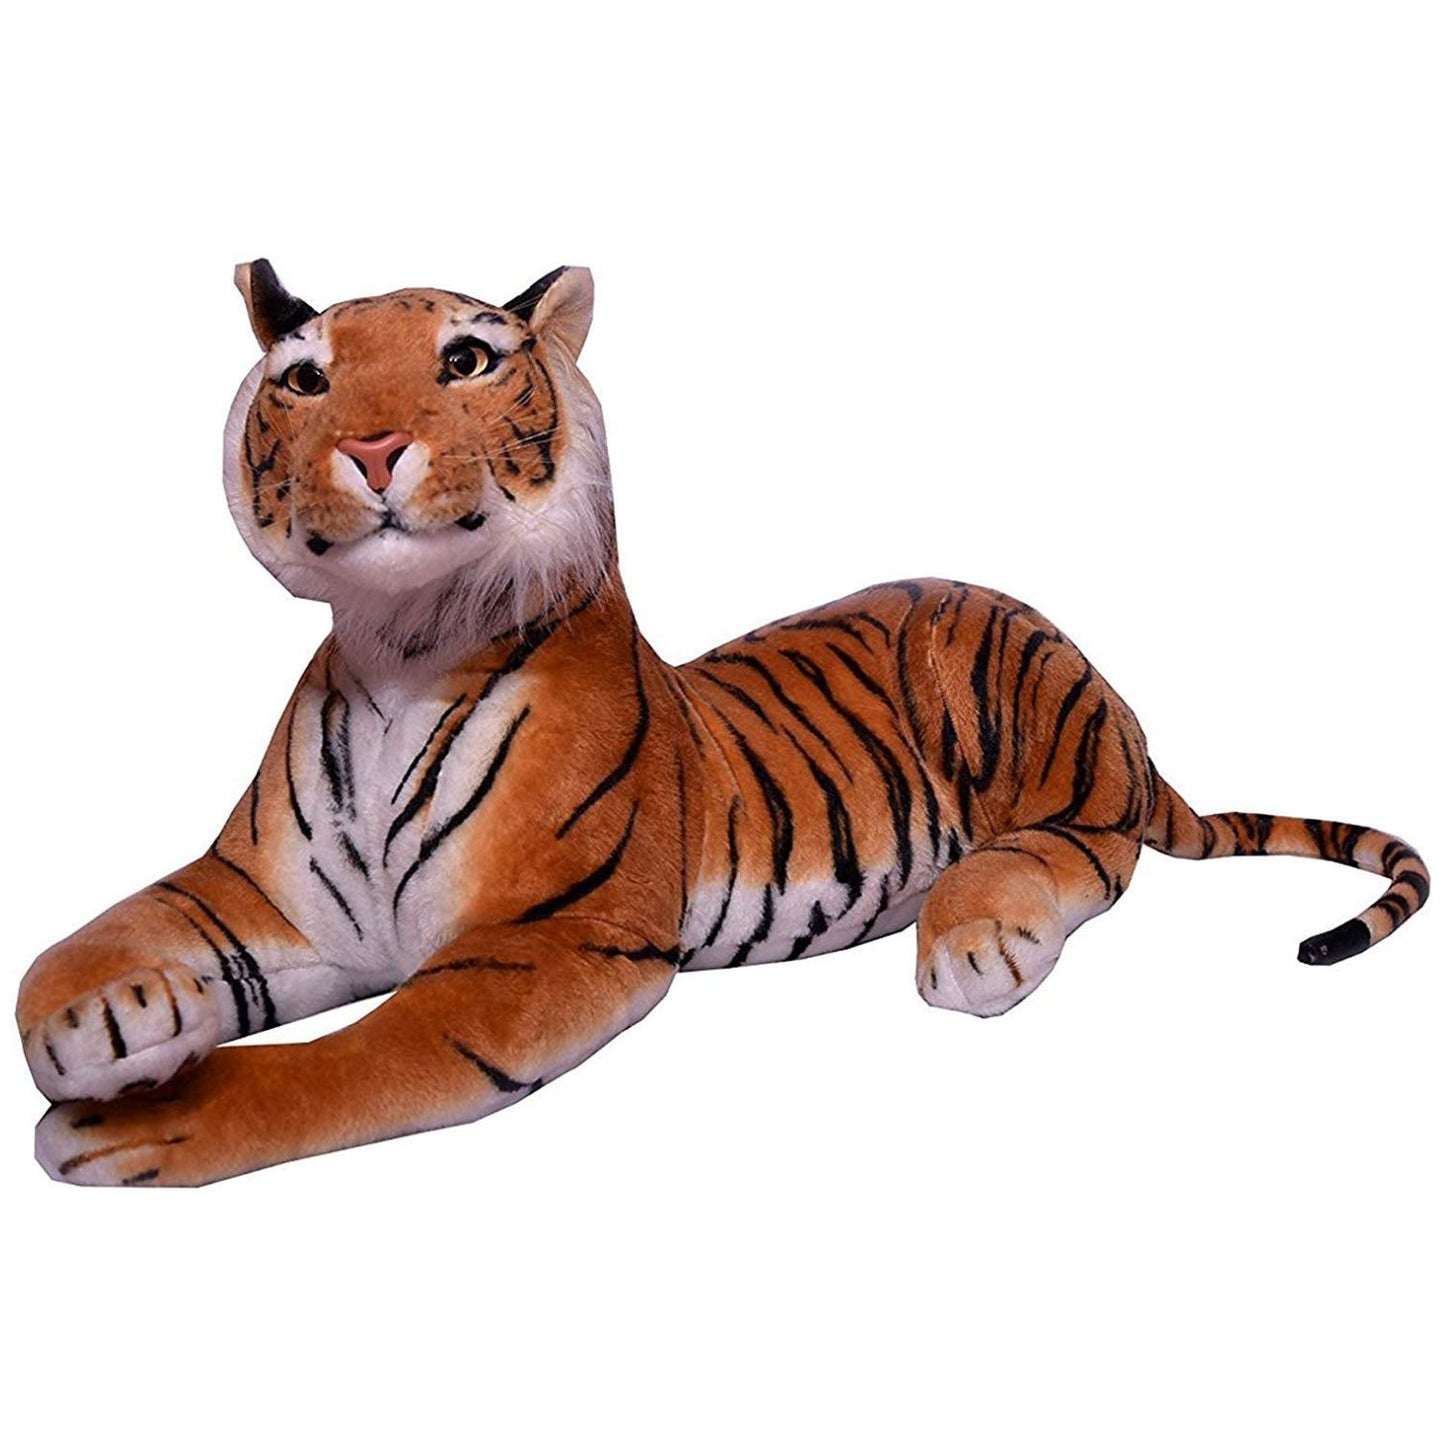 MM TOYS Real-Like Mini Tiger Soft Wild Animal Toy  32cm - Perfect Gift for Any Occasion, Decoration with Realistic Features, Skin, and Colors